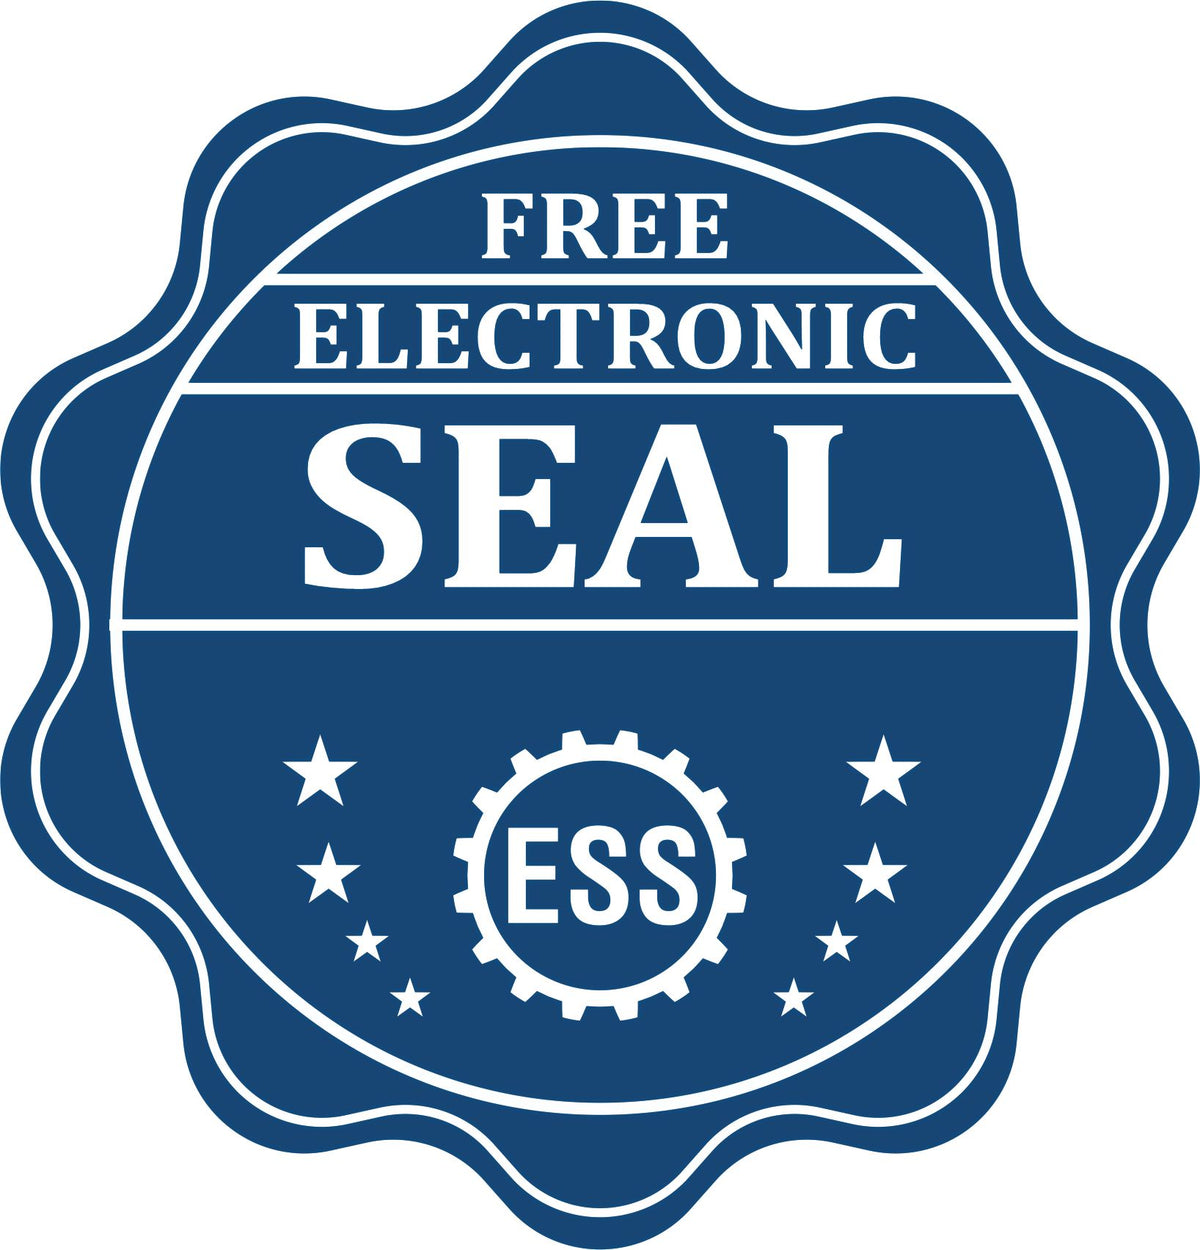 A badge showing a free electronic seal for the Michigan Geologist Desk Seal with stars and the ESS gear on the emblem.